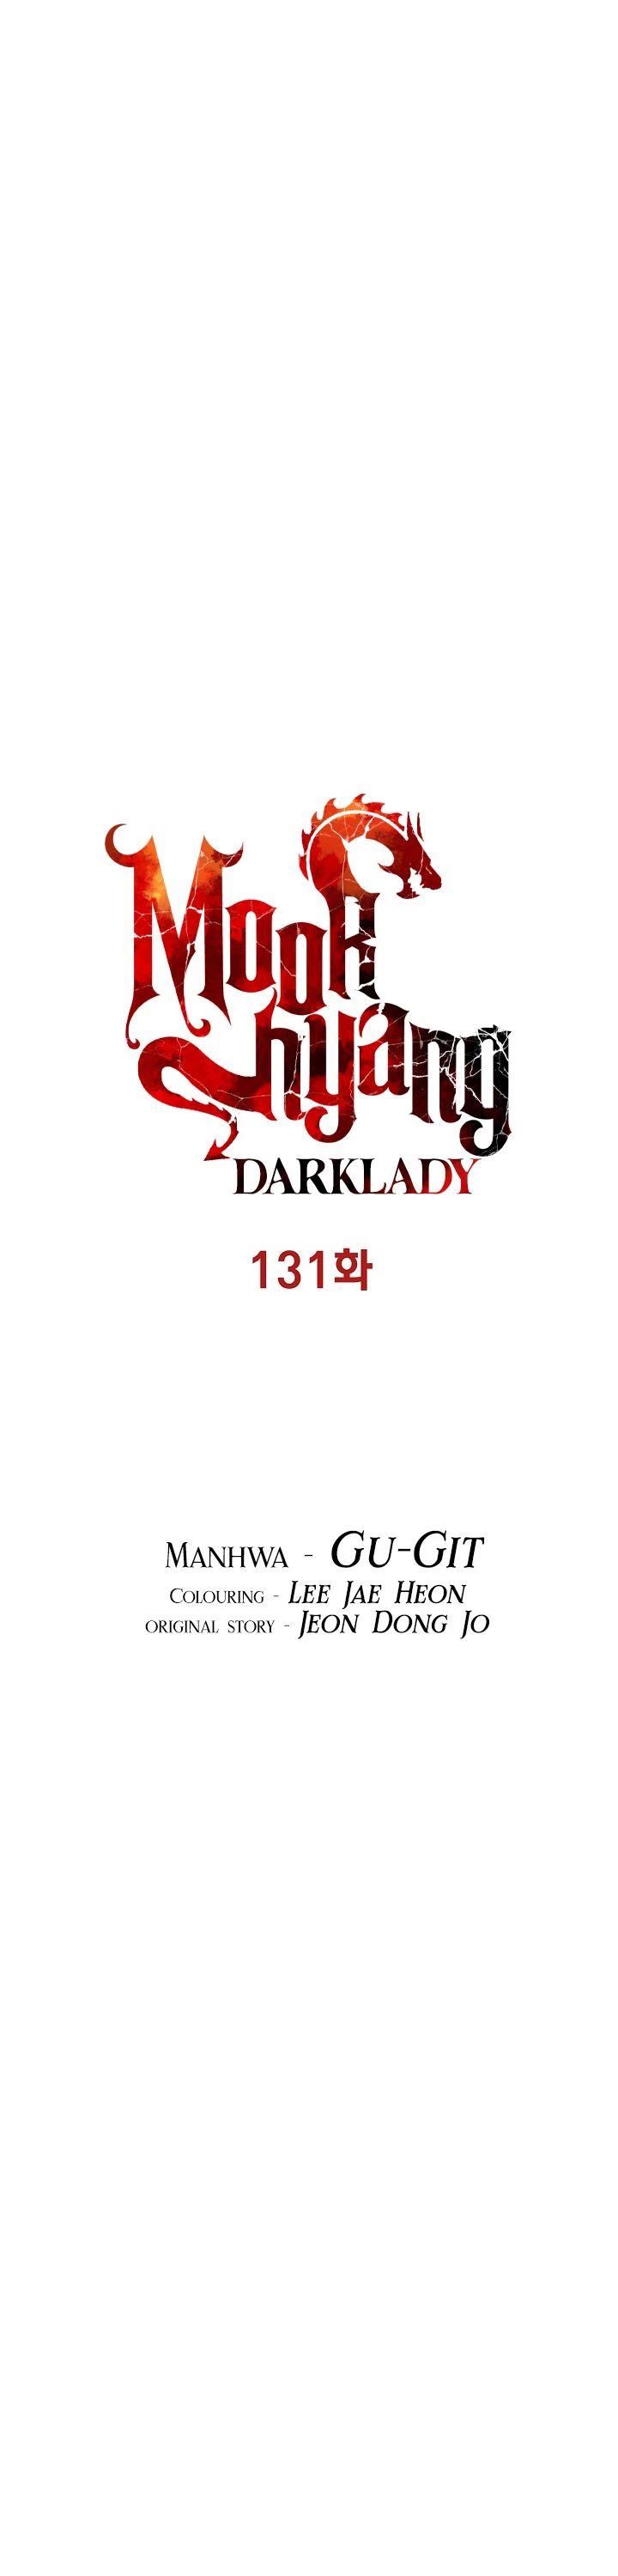 MookHyang – Dark Lady Chapter 131